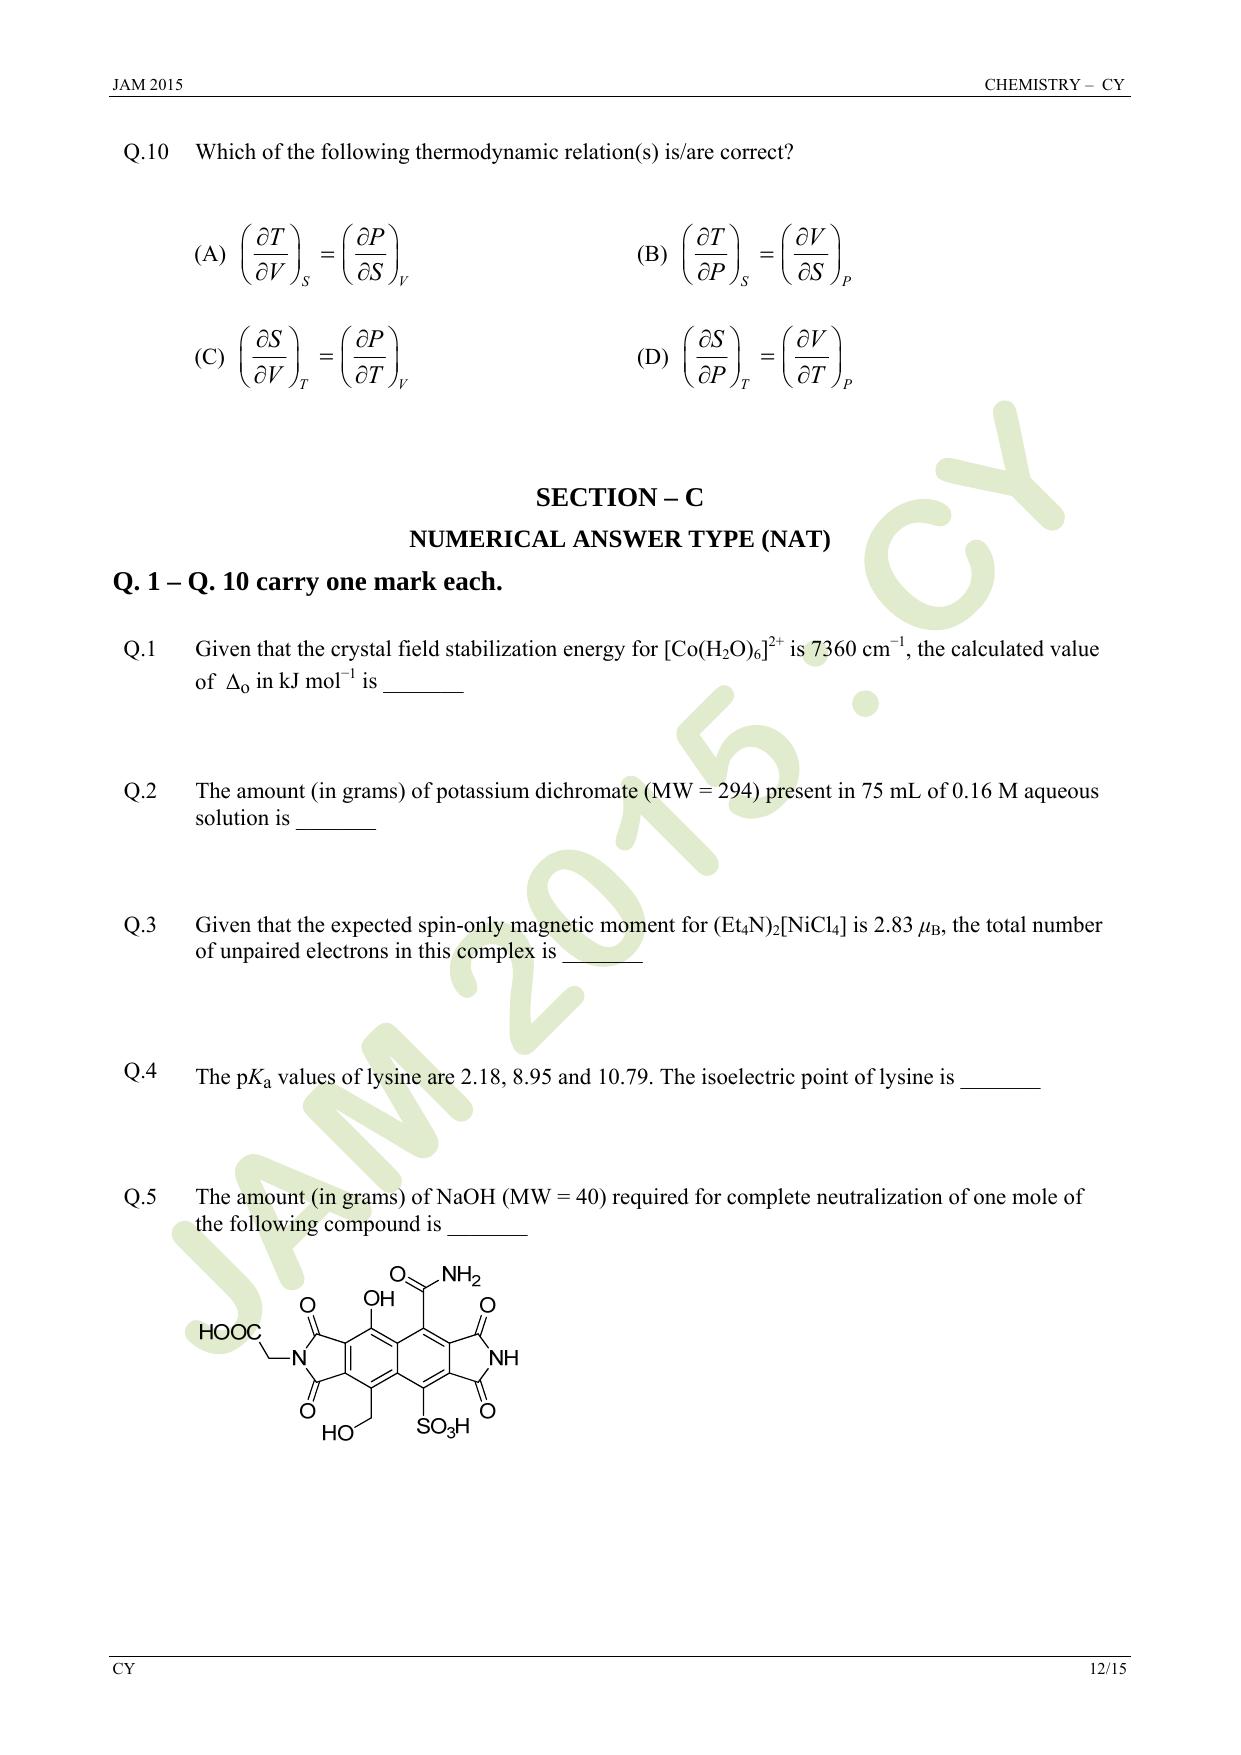 JAM 2015: CY Question Paper - Page 12